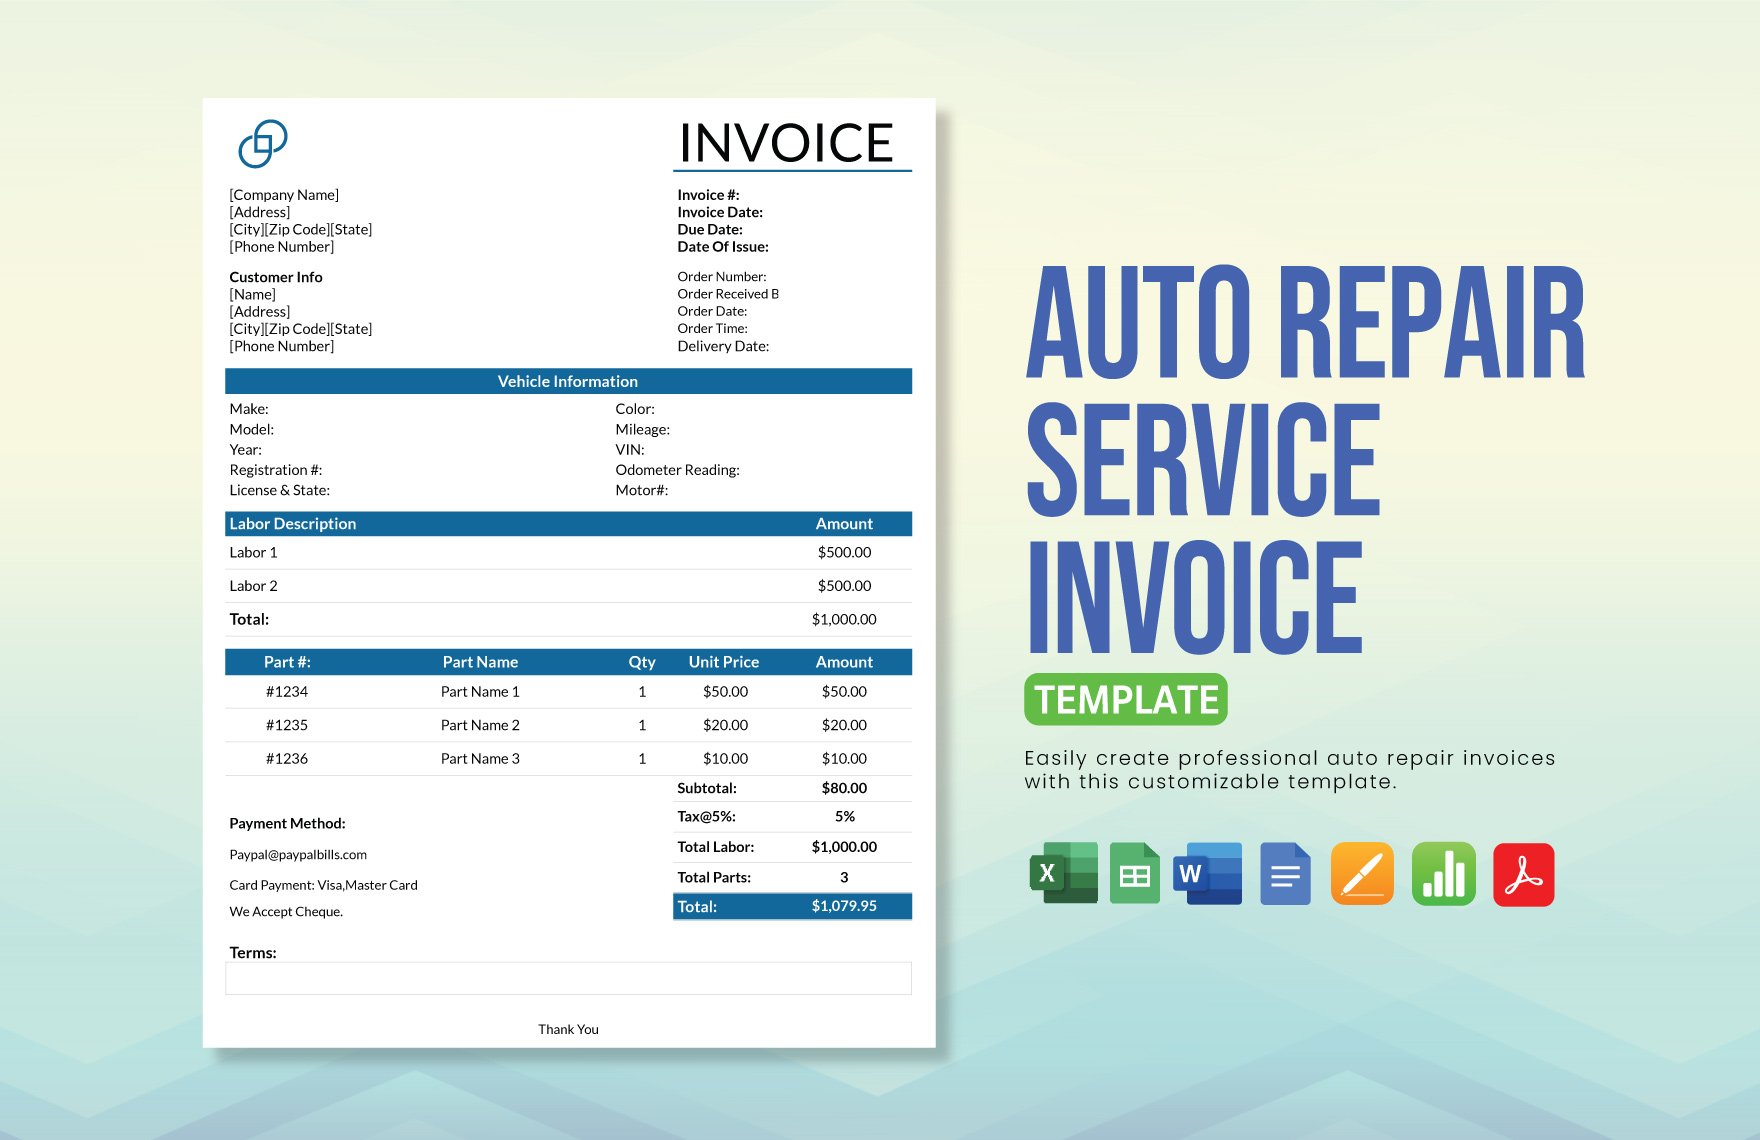 Auto Repair Service Invoice Template in Word, Google Docs, Excel, PDF, Google Sheets, Apple Pages, Apple Numbers